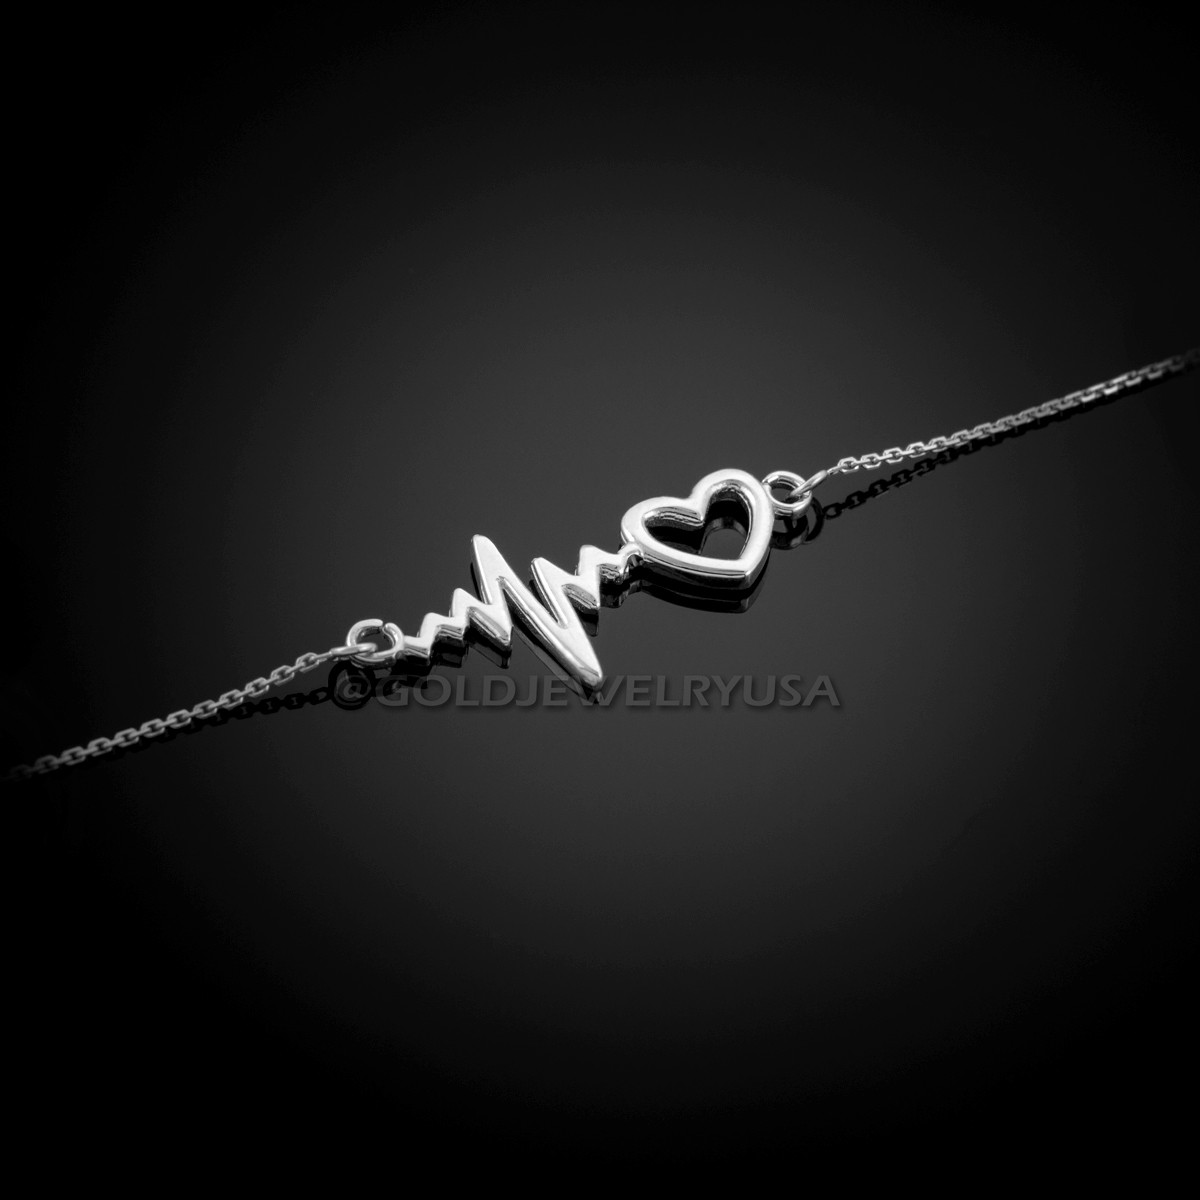 14k Yellow, White or Rose Gold Diamond Heartbeat Necklace, 16-18 Inch - The  Black Bow Jewelry Company